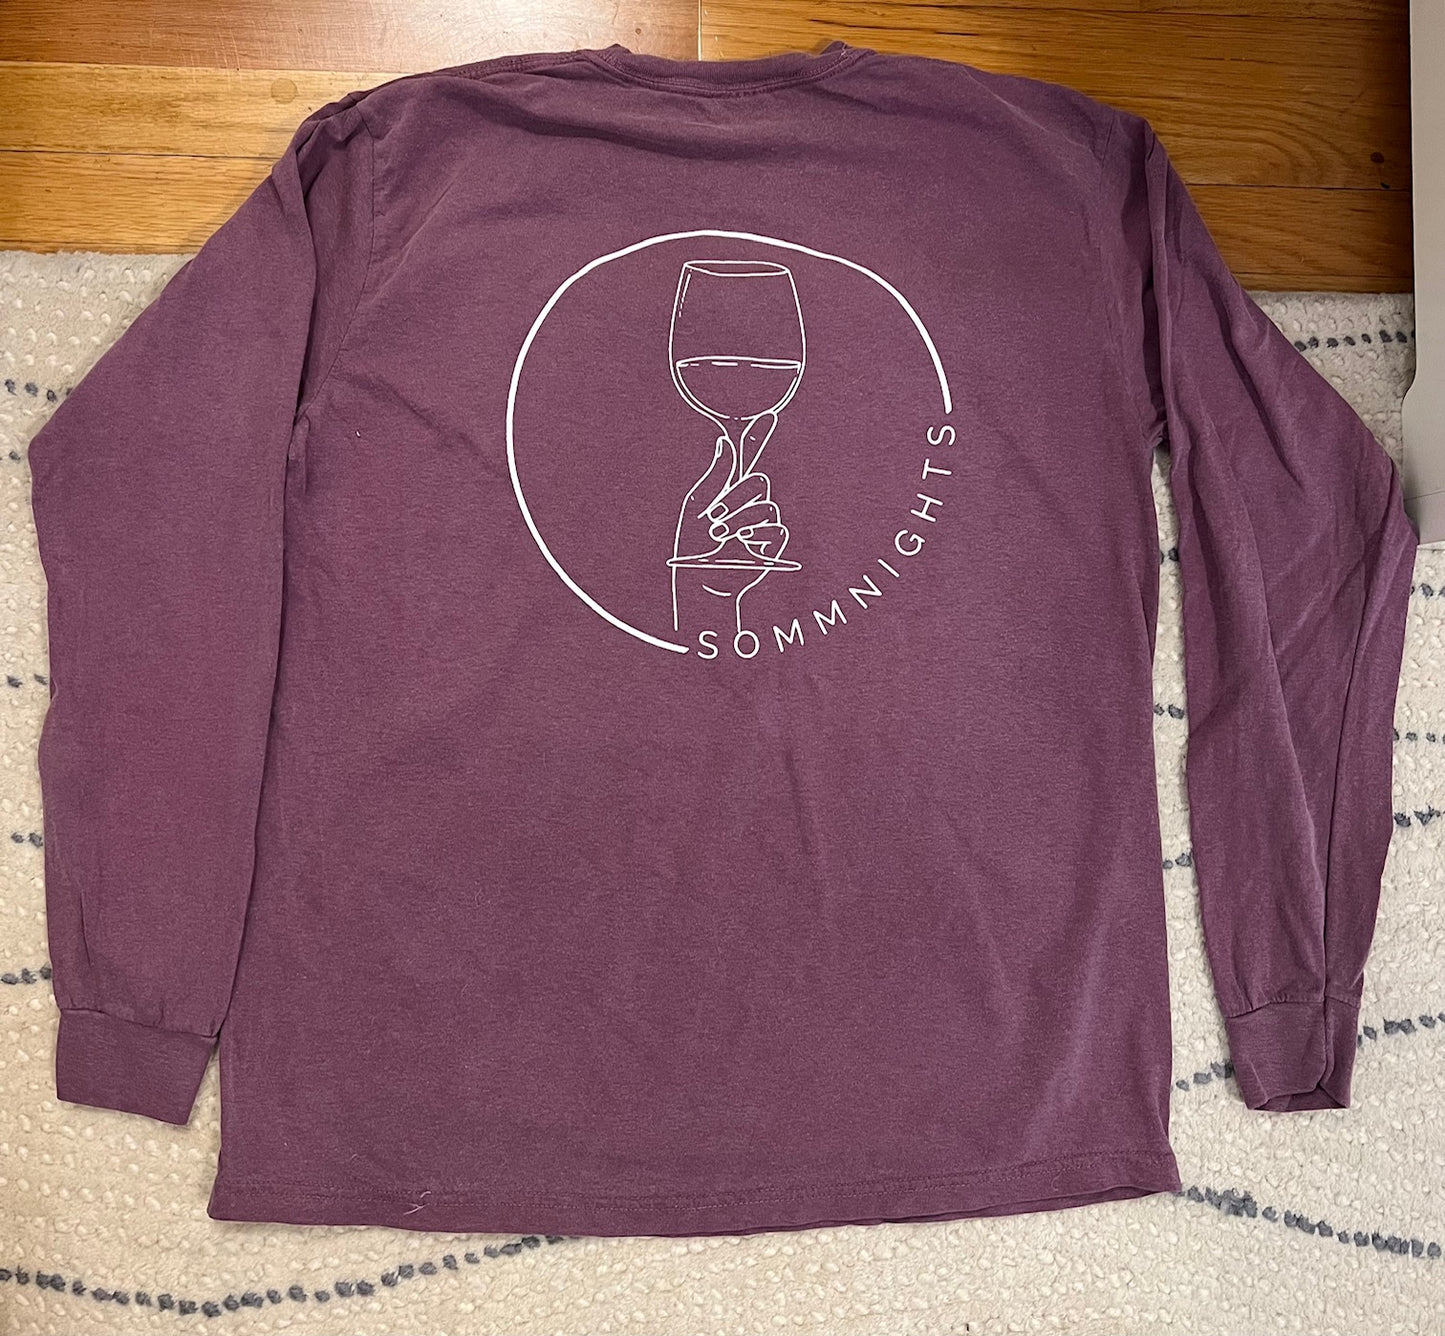 sommnights long sleeved tee